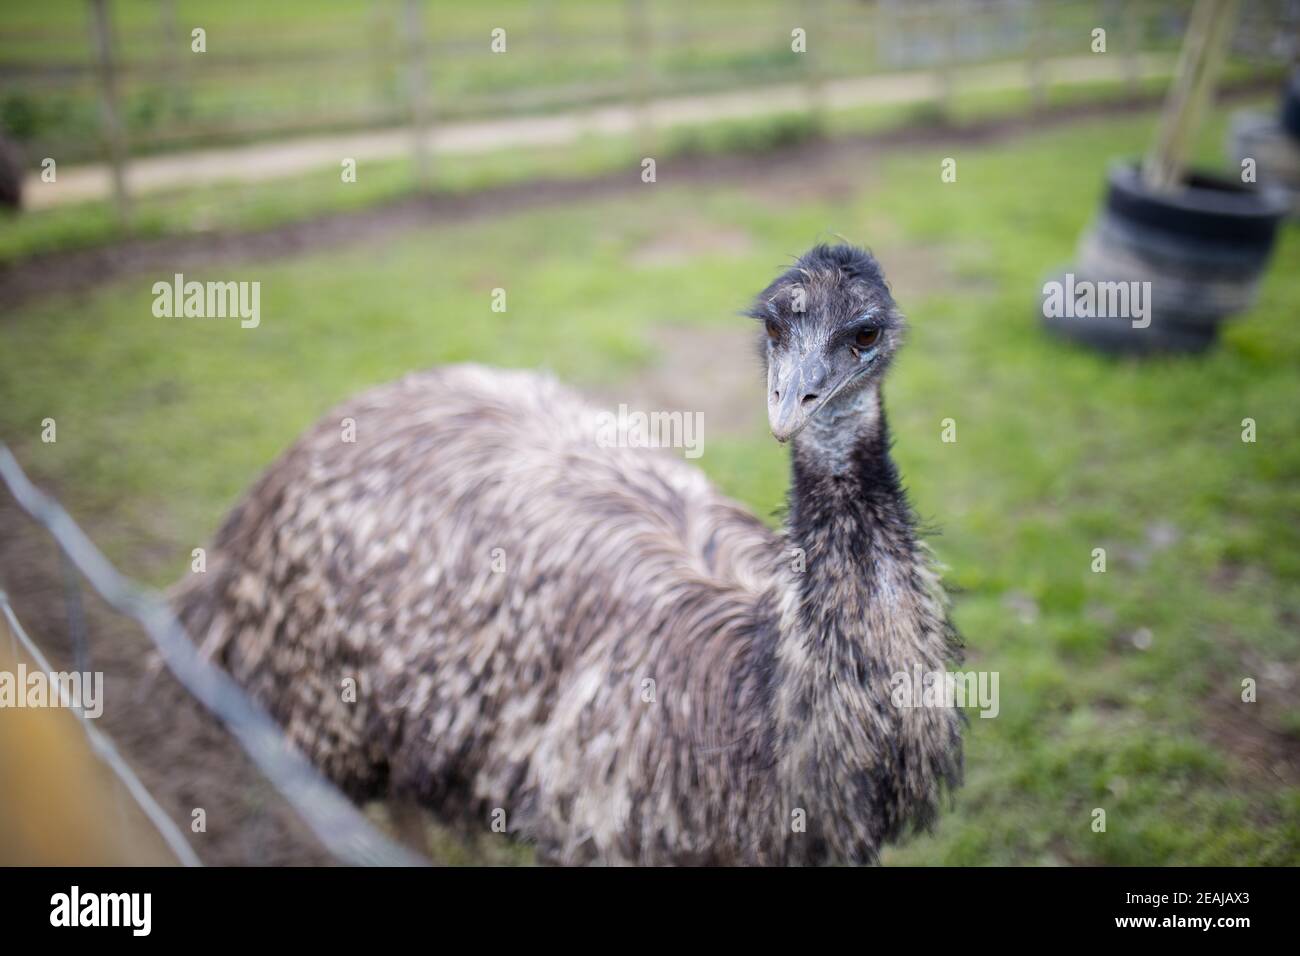 Above view of an Emu standing on the grass behind a wire fence at a farmyard Stock Photo